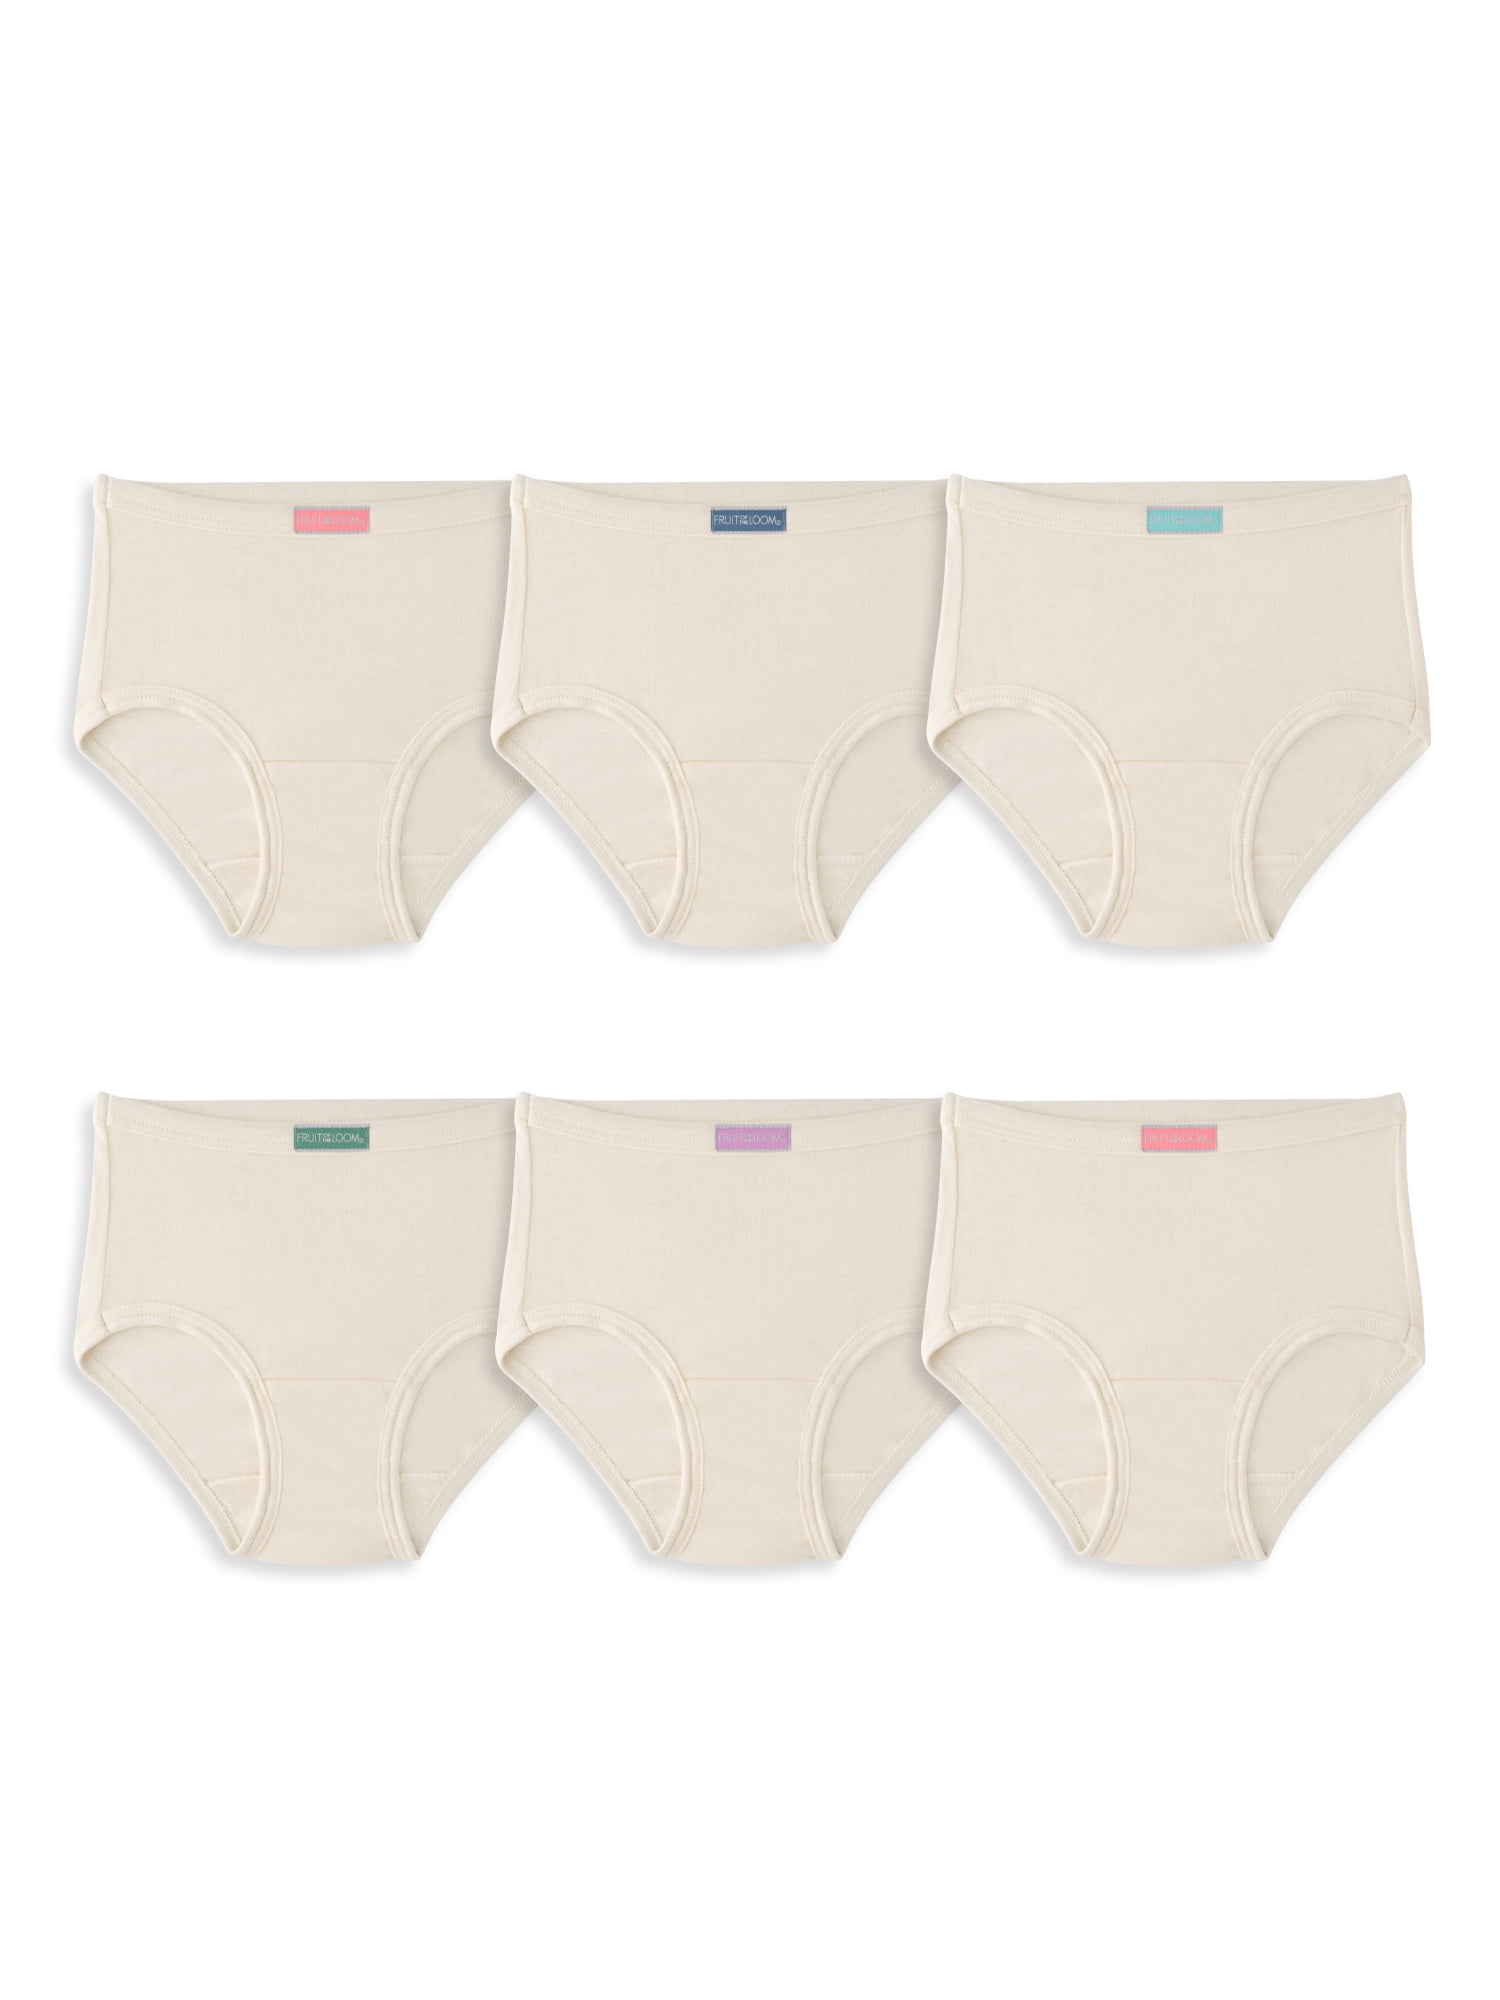 Fruit of the Loom Toddler Girl Natural Cotton Briefs, 6 Pack